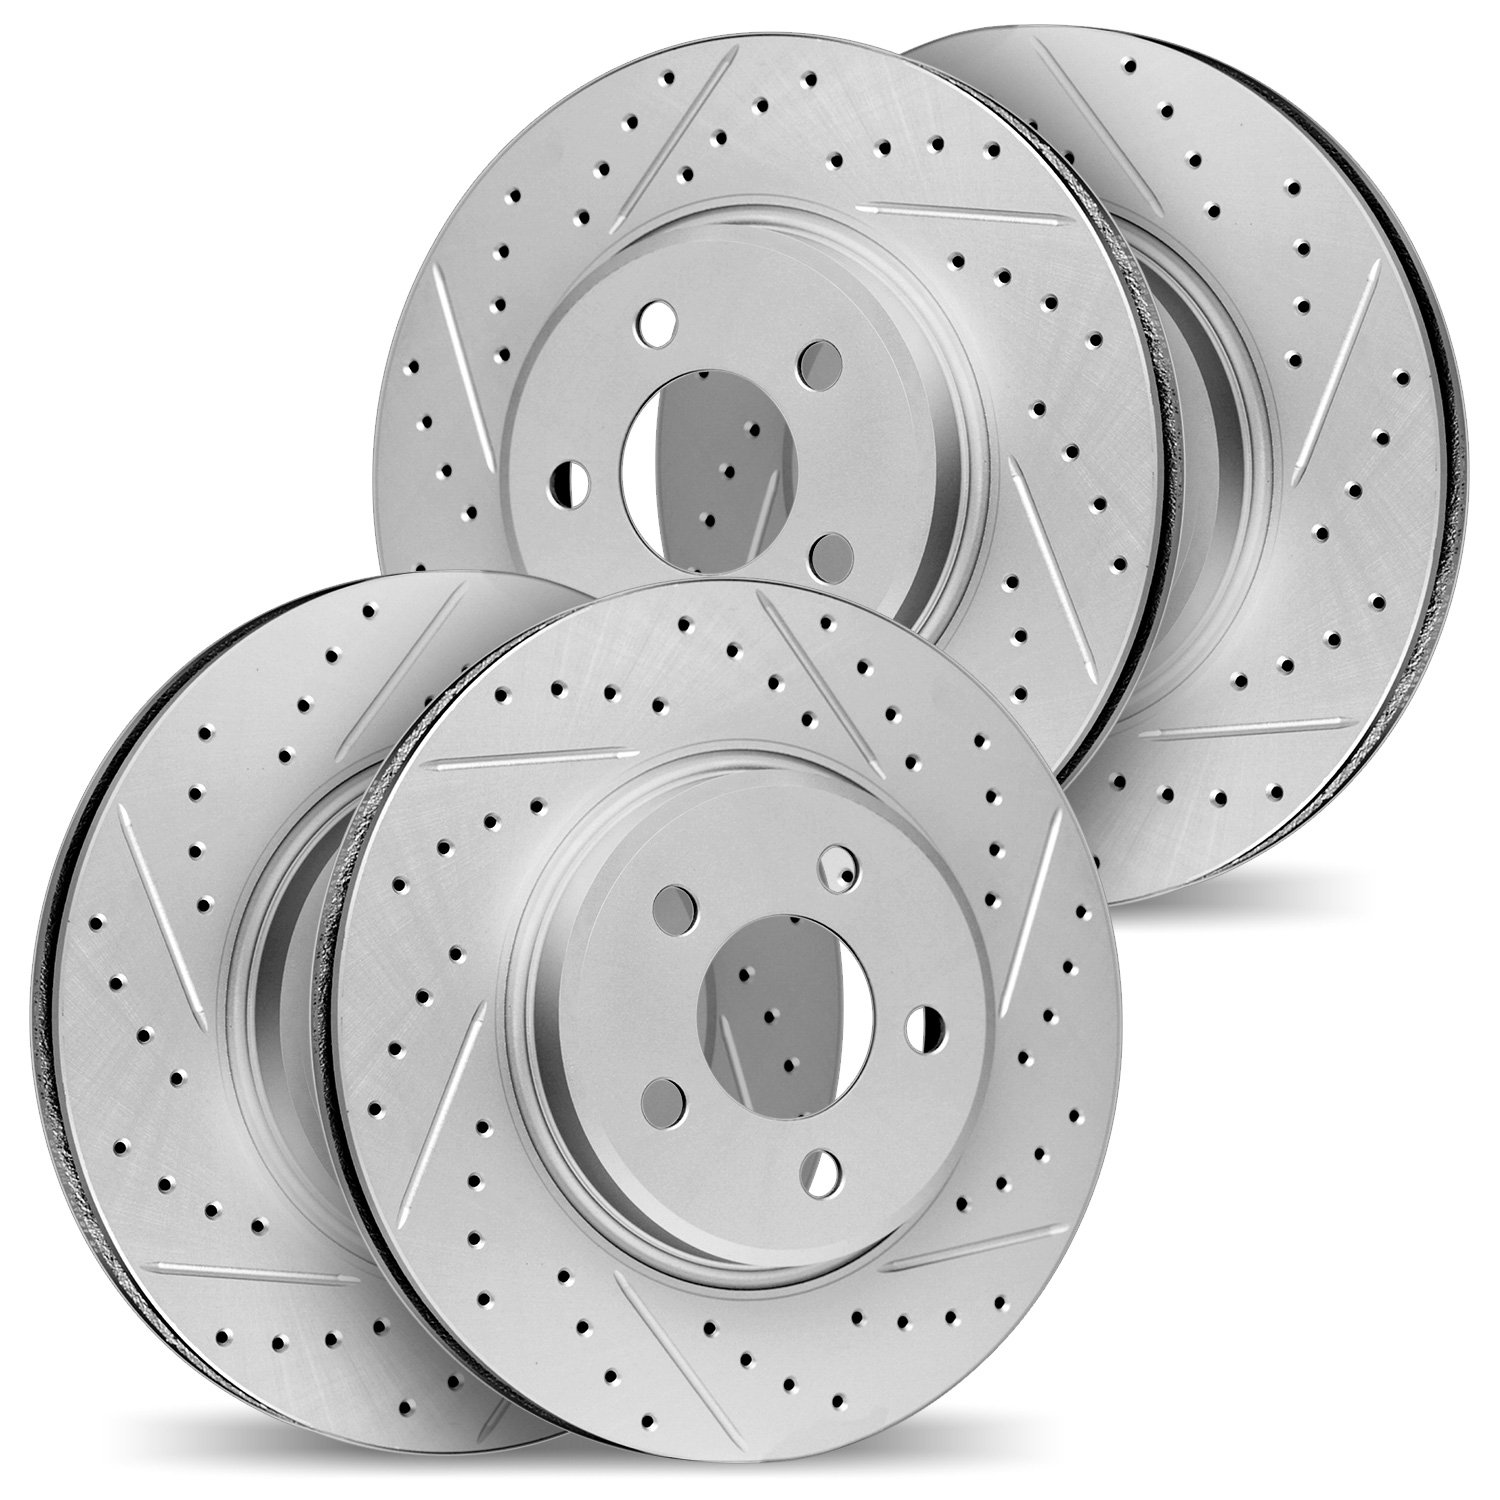 2004-10001 Geoperformance Drilled/Slotted Brake Rotors, Fits Select Kia/Hyundai/Genesis, Position: Front and Rear